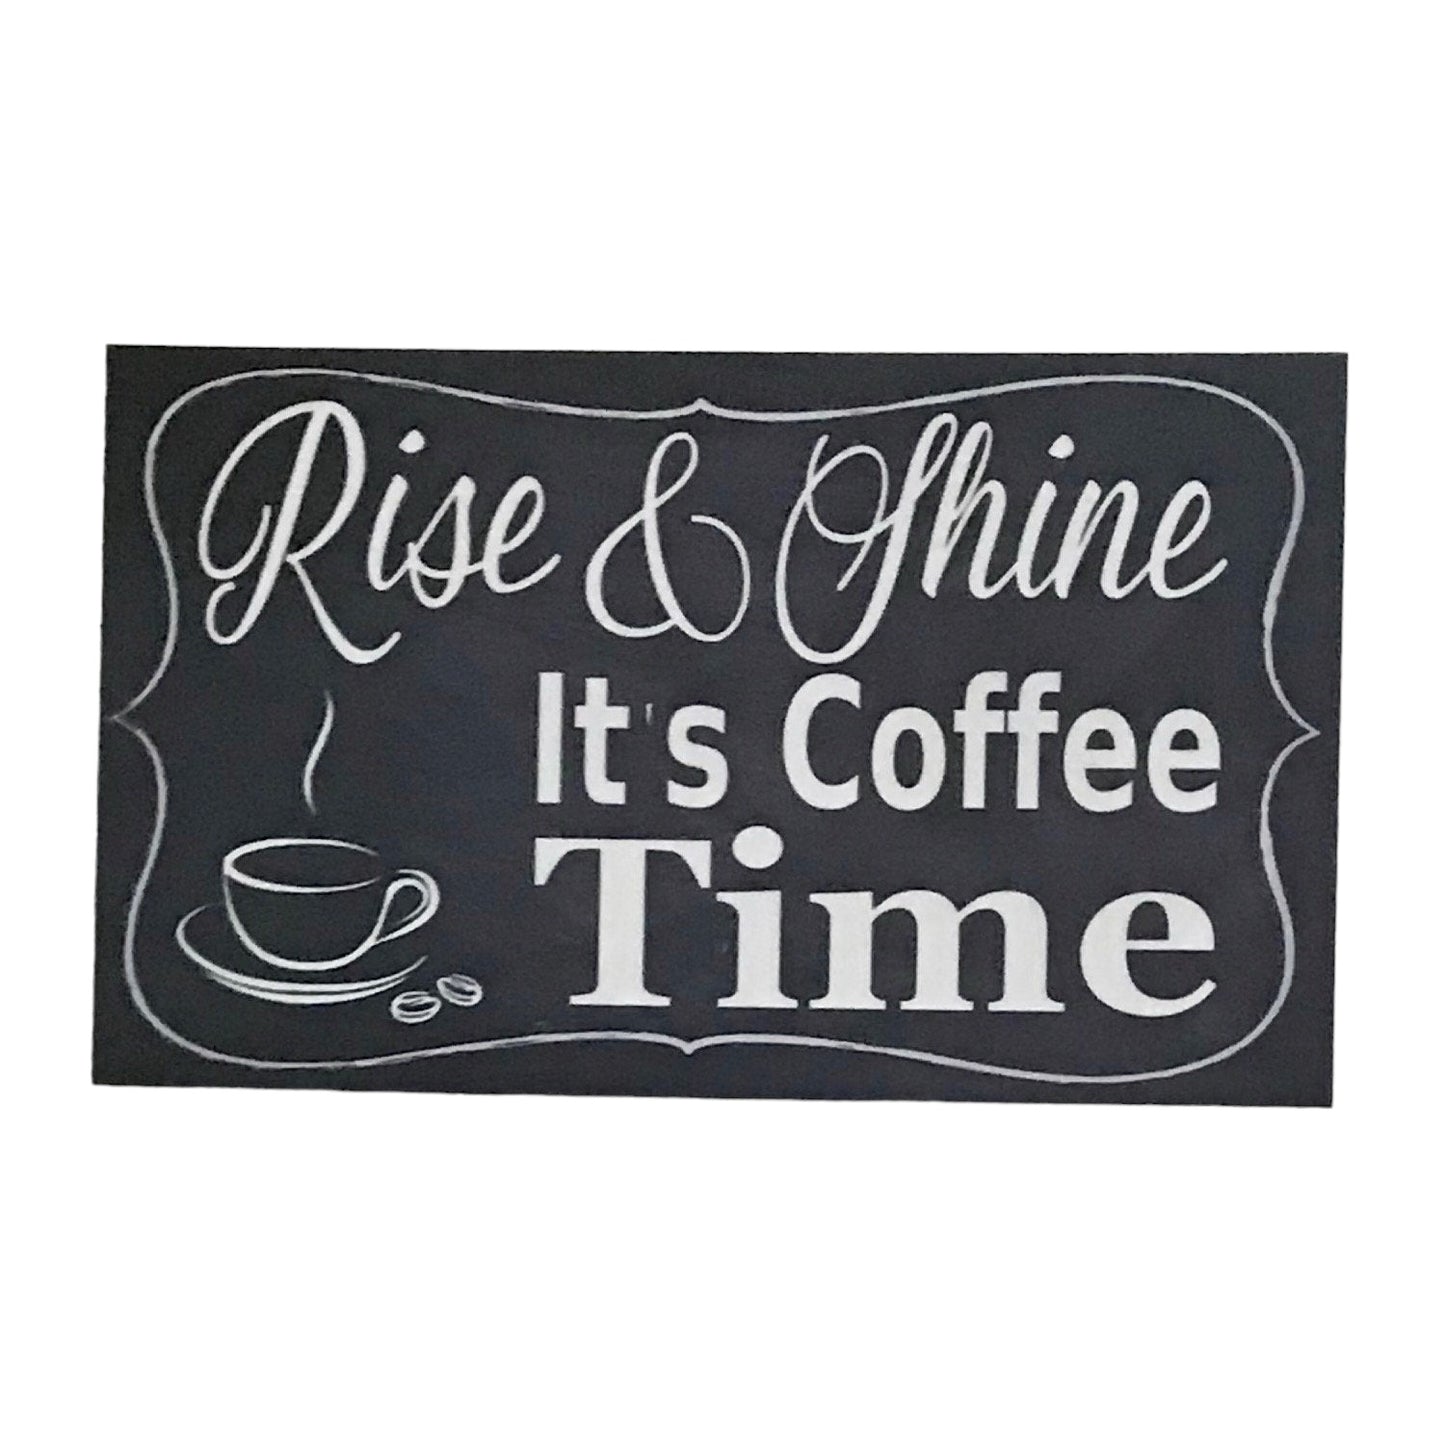 Rise And Shine its Coffee Time Sign - The Renmy Store Homewares & Gifts 